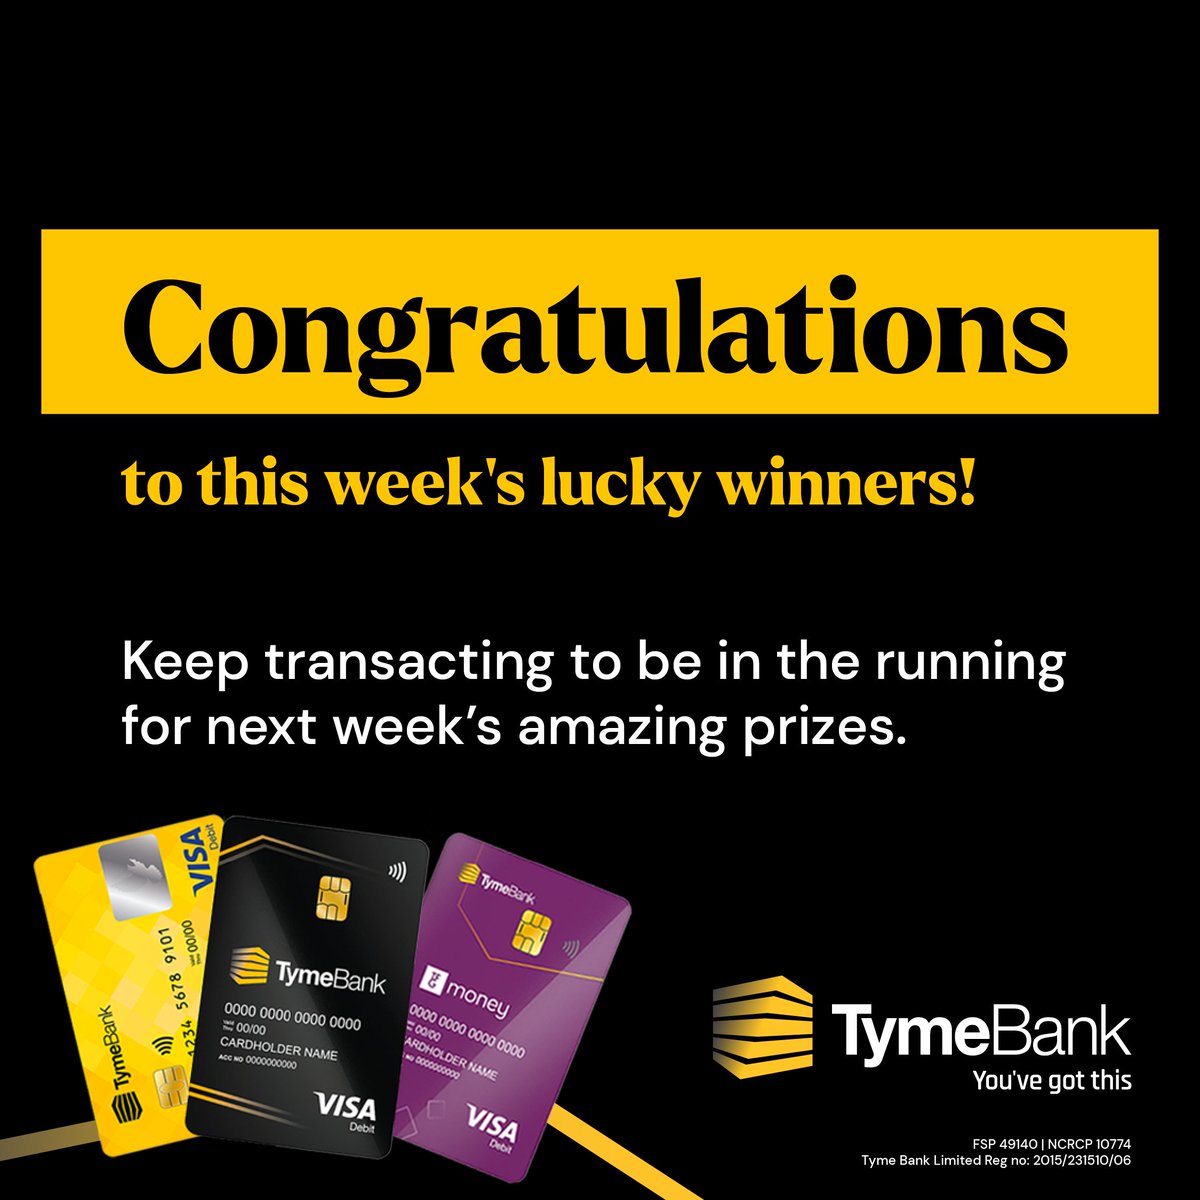 #TymeToSwitch Competition Winners! 🥳

Congratulations to all the below TymeBank winners. Keep transacting this week and stand to WIN PnP, Petrol, Nando's, SendMoney vouchers and so much more!